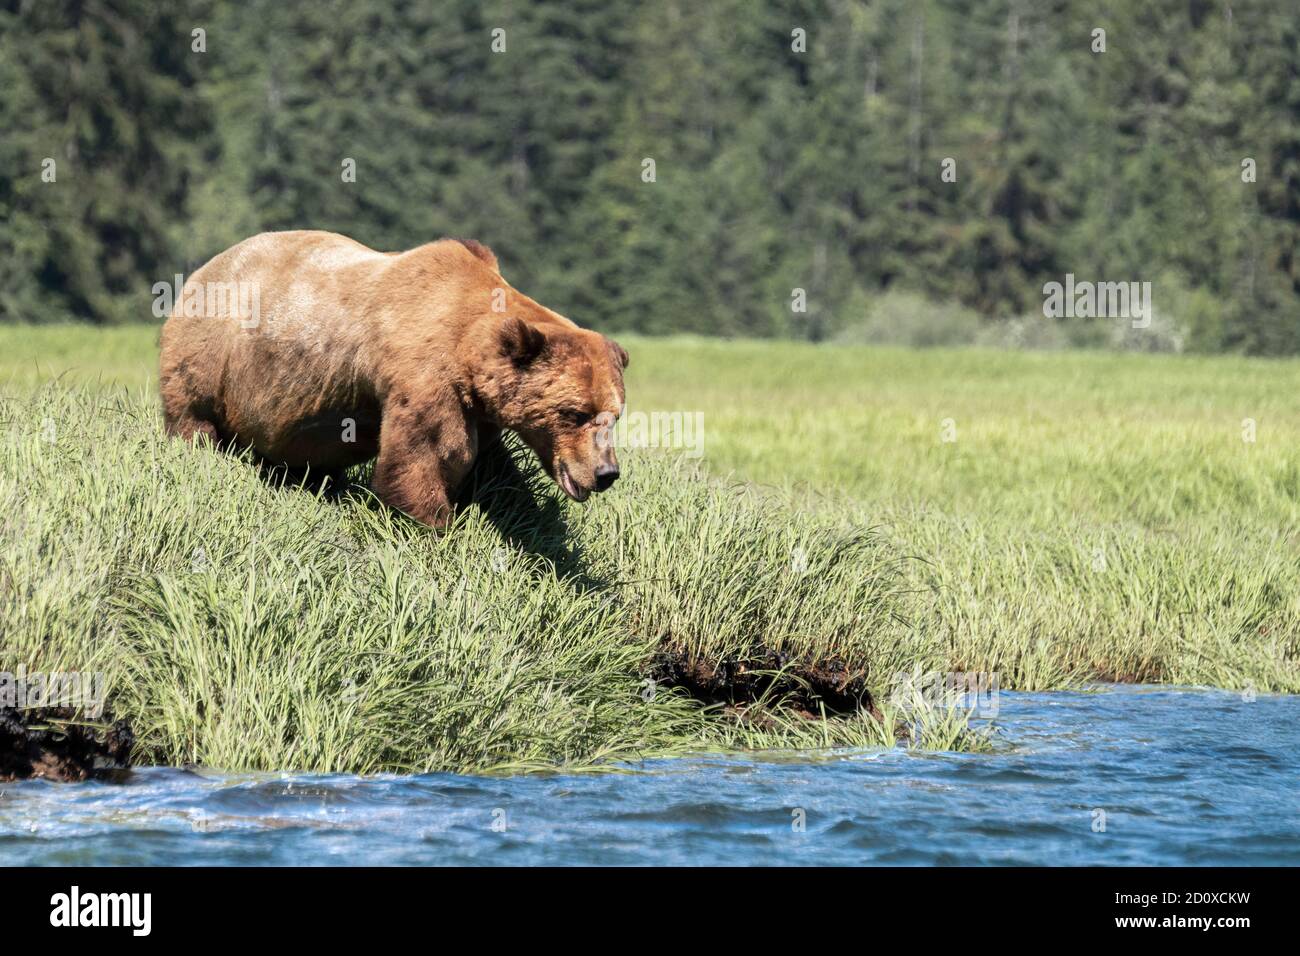 Scarred up old grizzly bear in the sedge grass, Khutzeymateen, BC Stock Photo